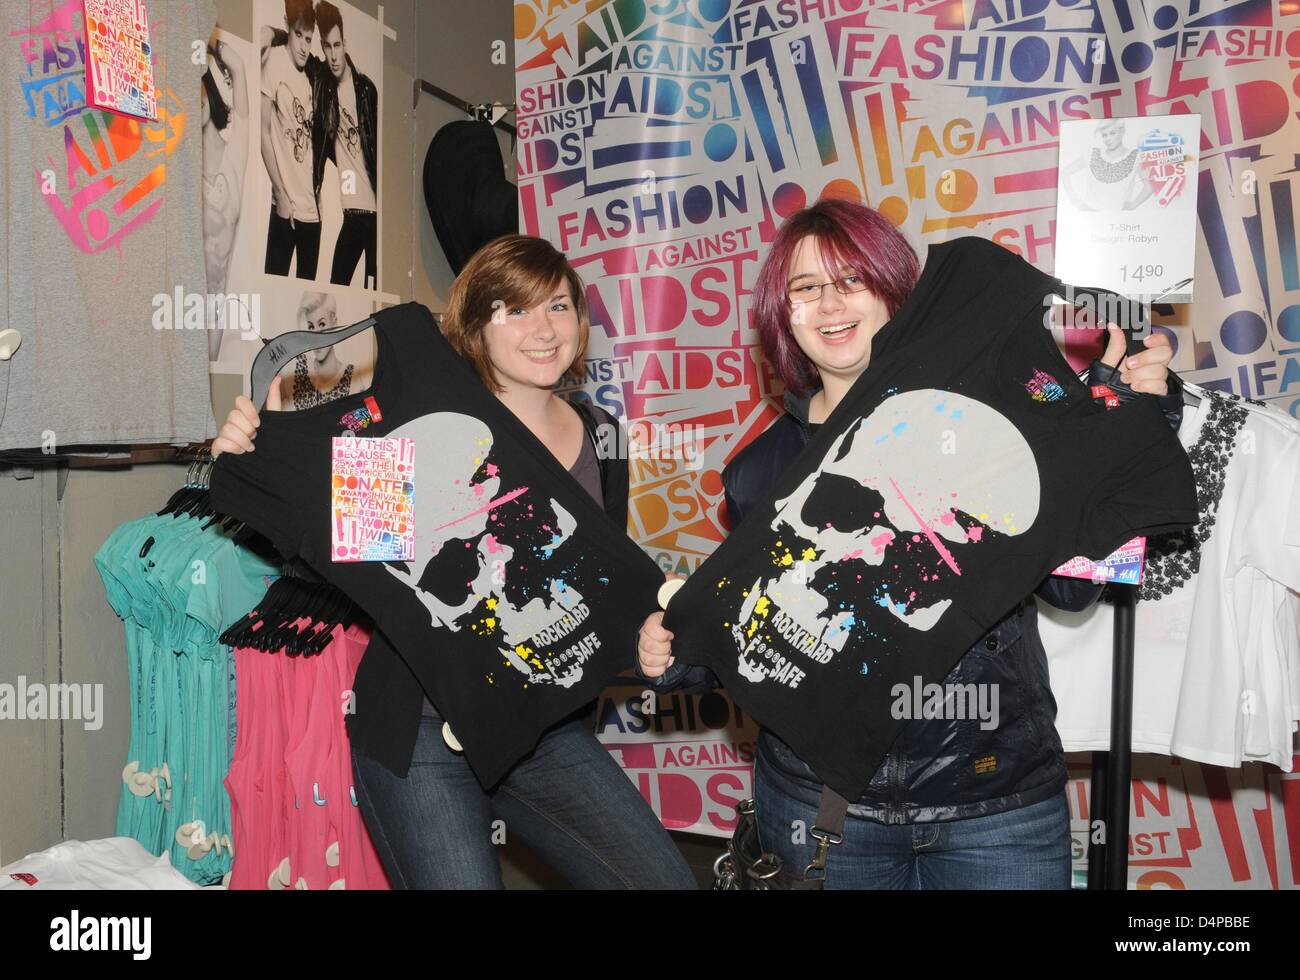 Julia Jung (L) and Sina Zander, fans of the band ?Tokio Hotel?, present  T-shirts designed by the band in a H&M store in Munich, Germany, 28 May  2009. The band designed the